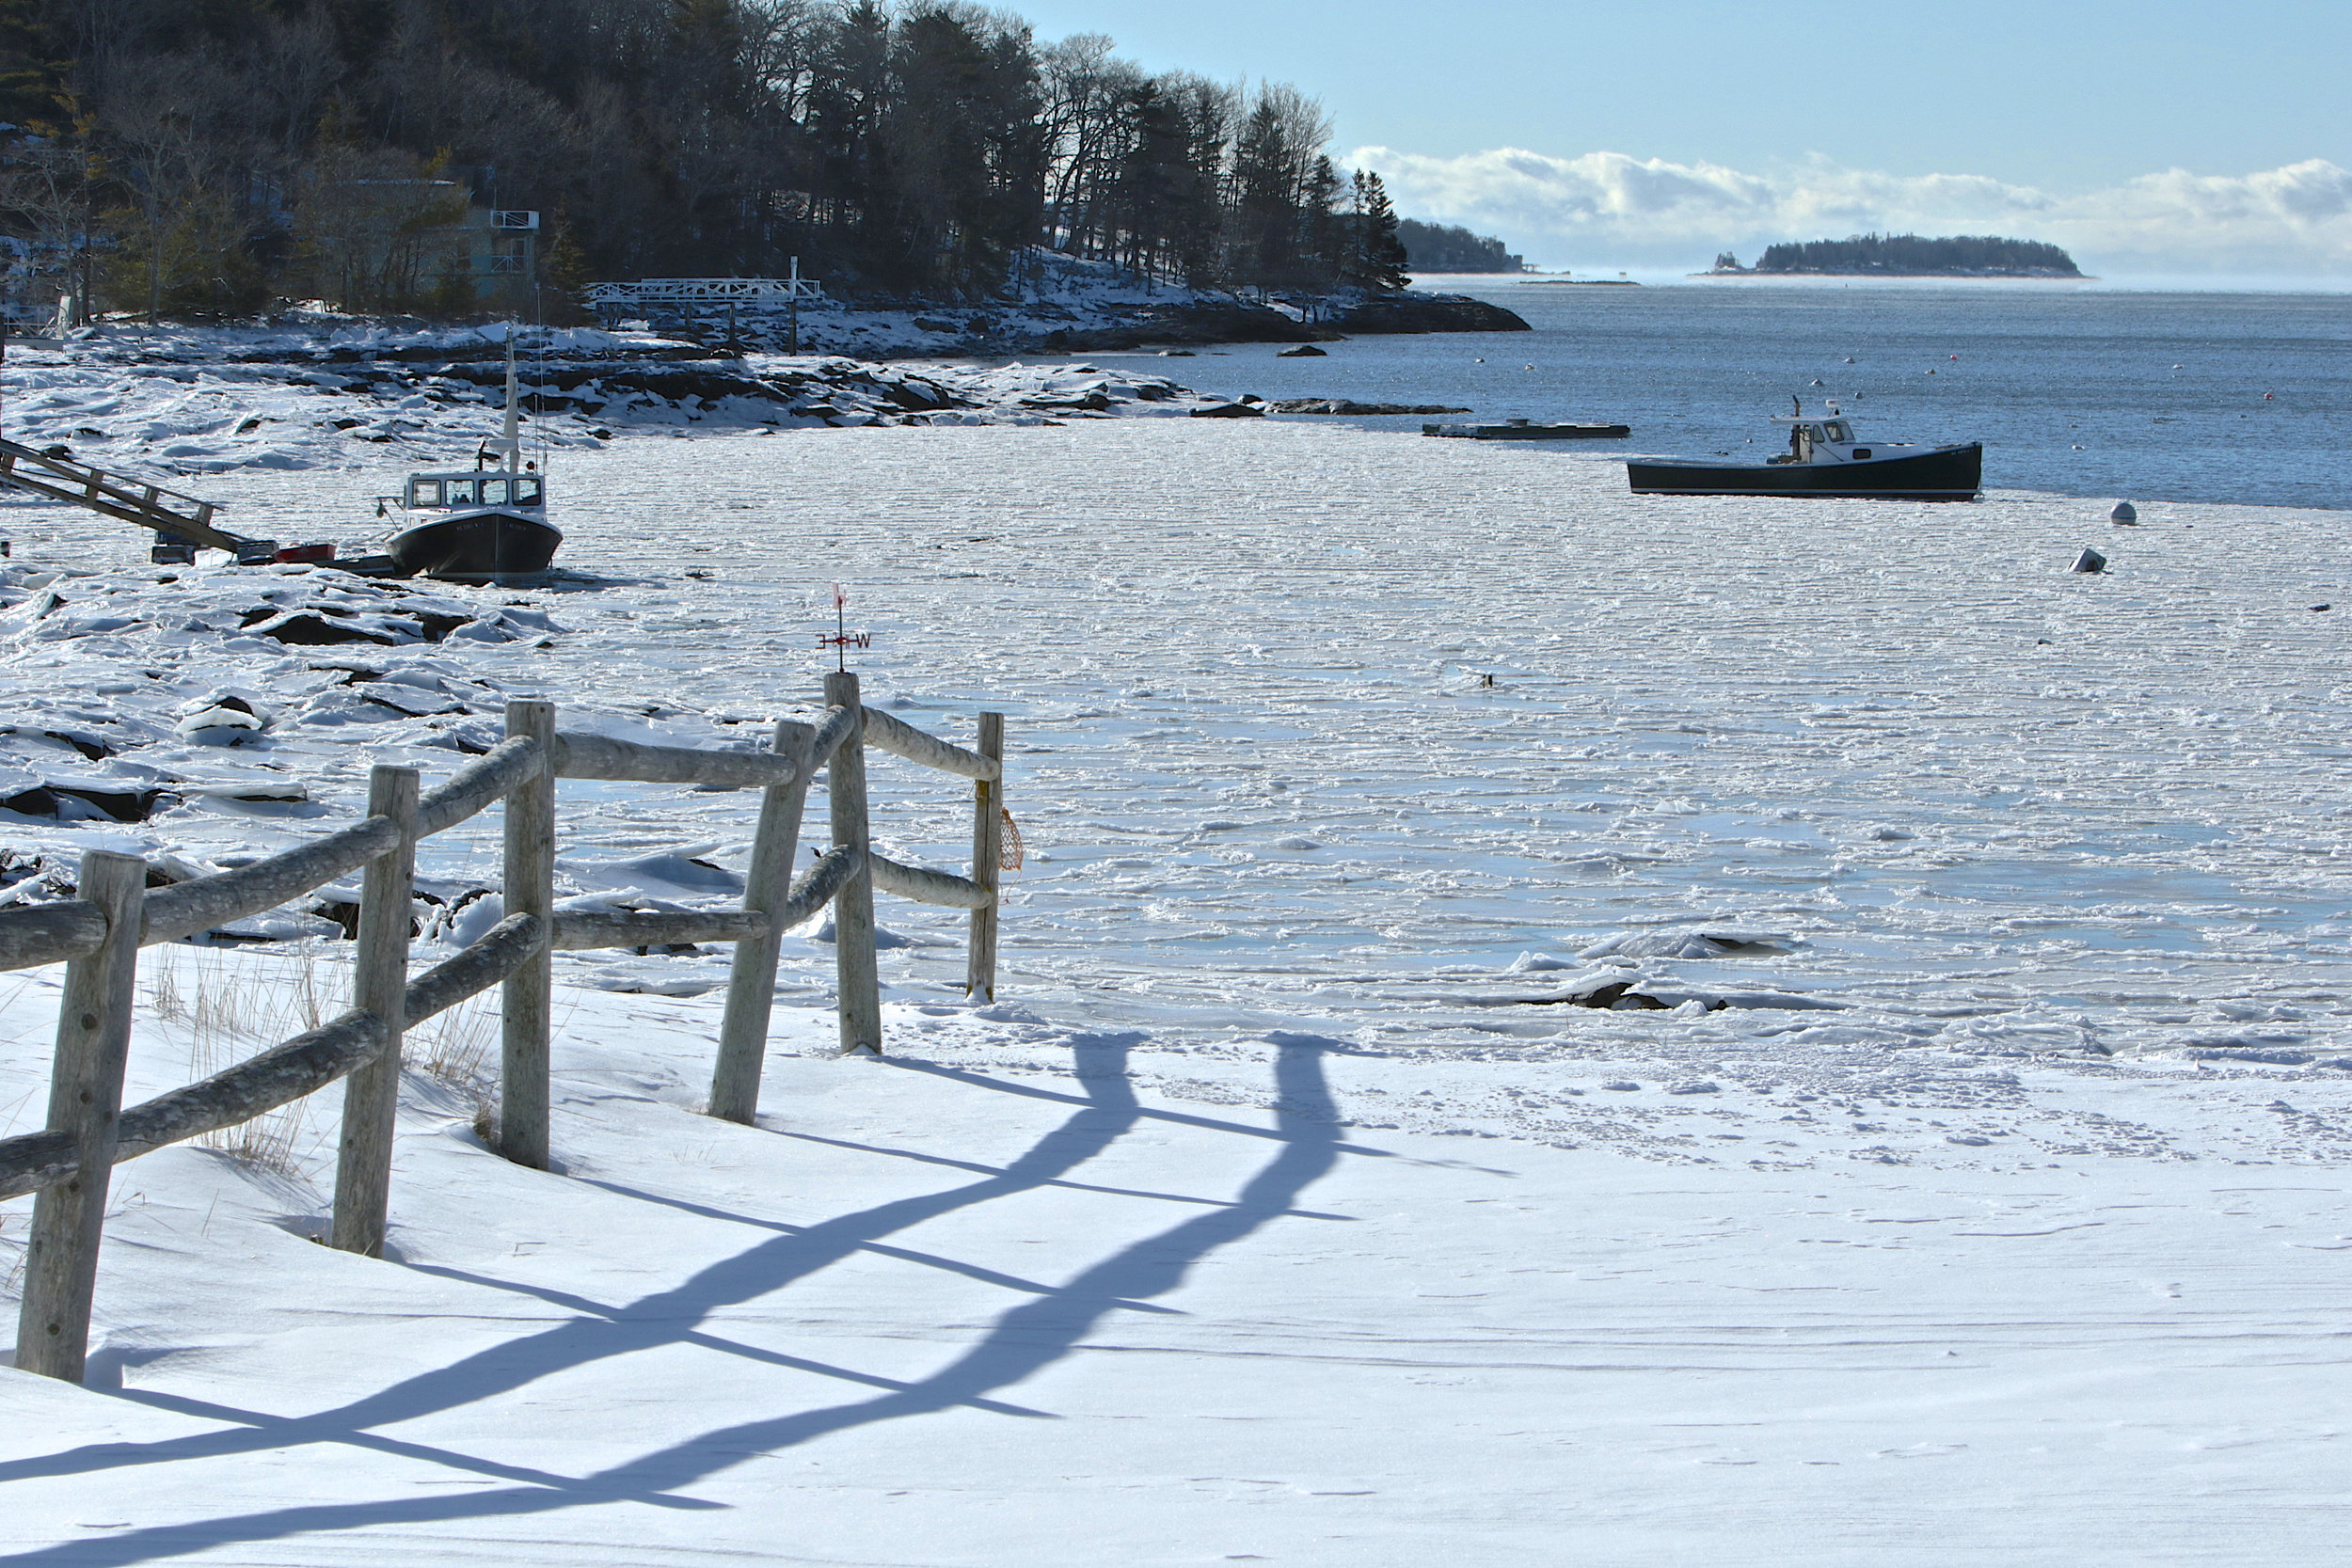 January: East Boothbay